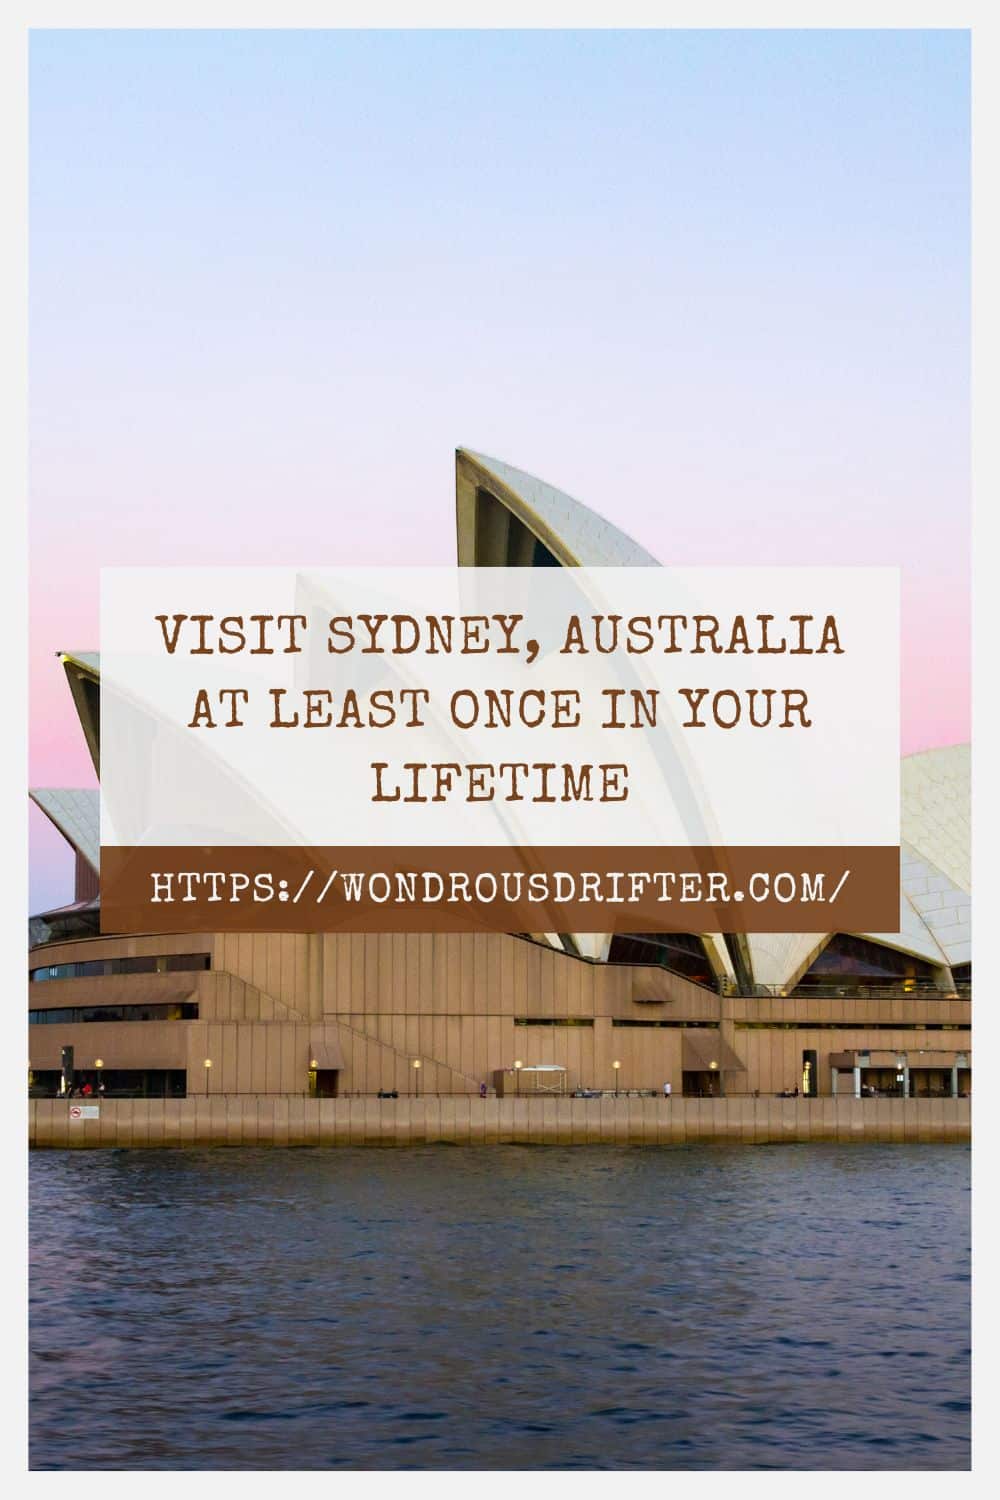 Visit Sydney Australia at least once in your lifetime